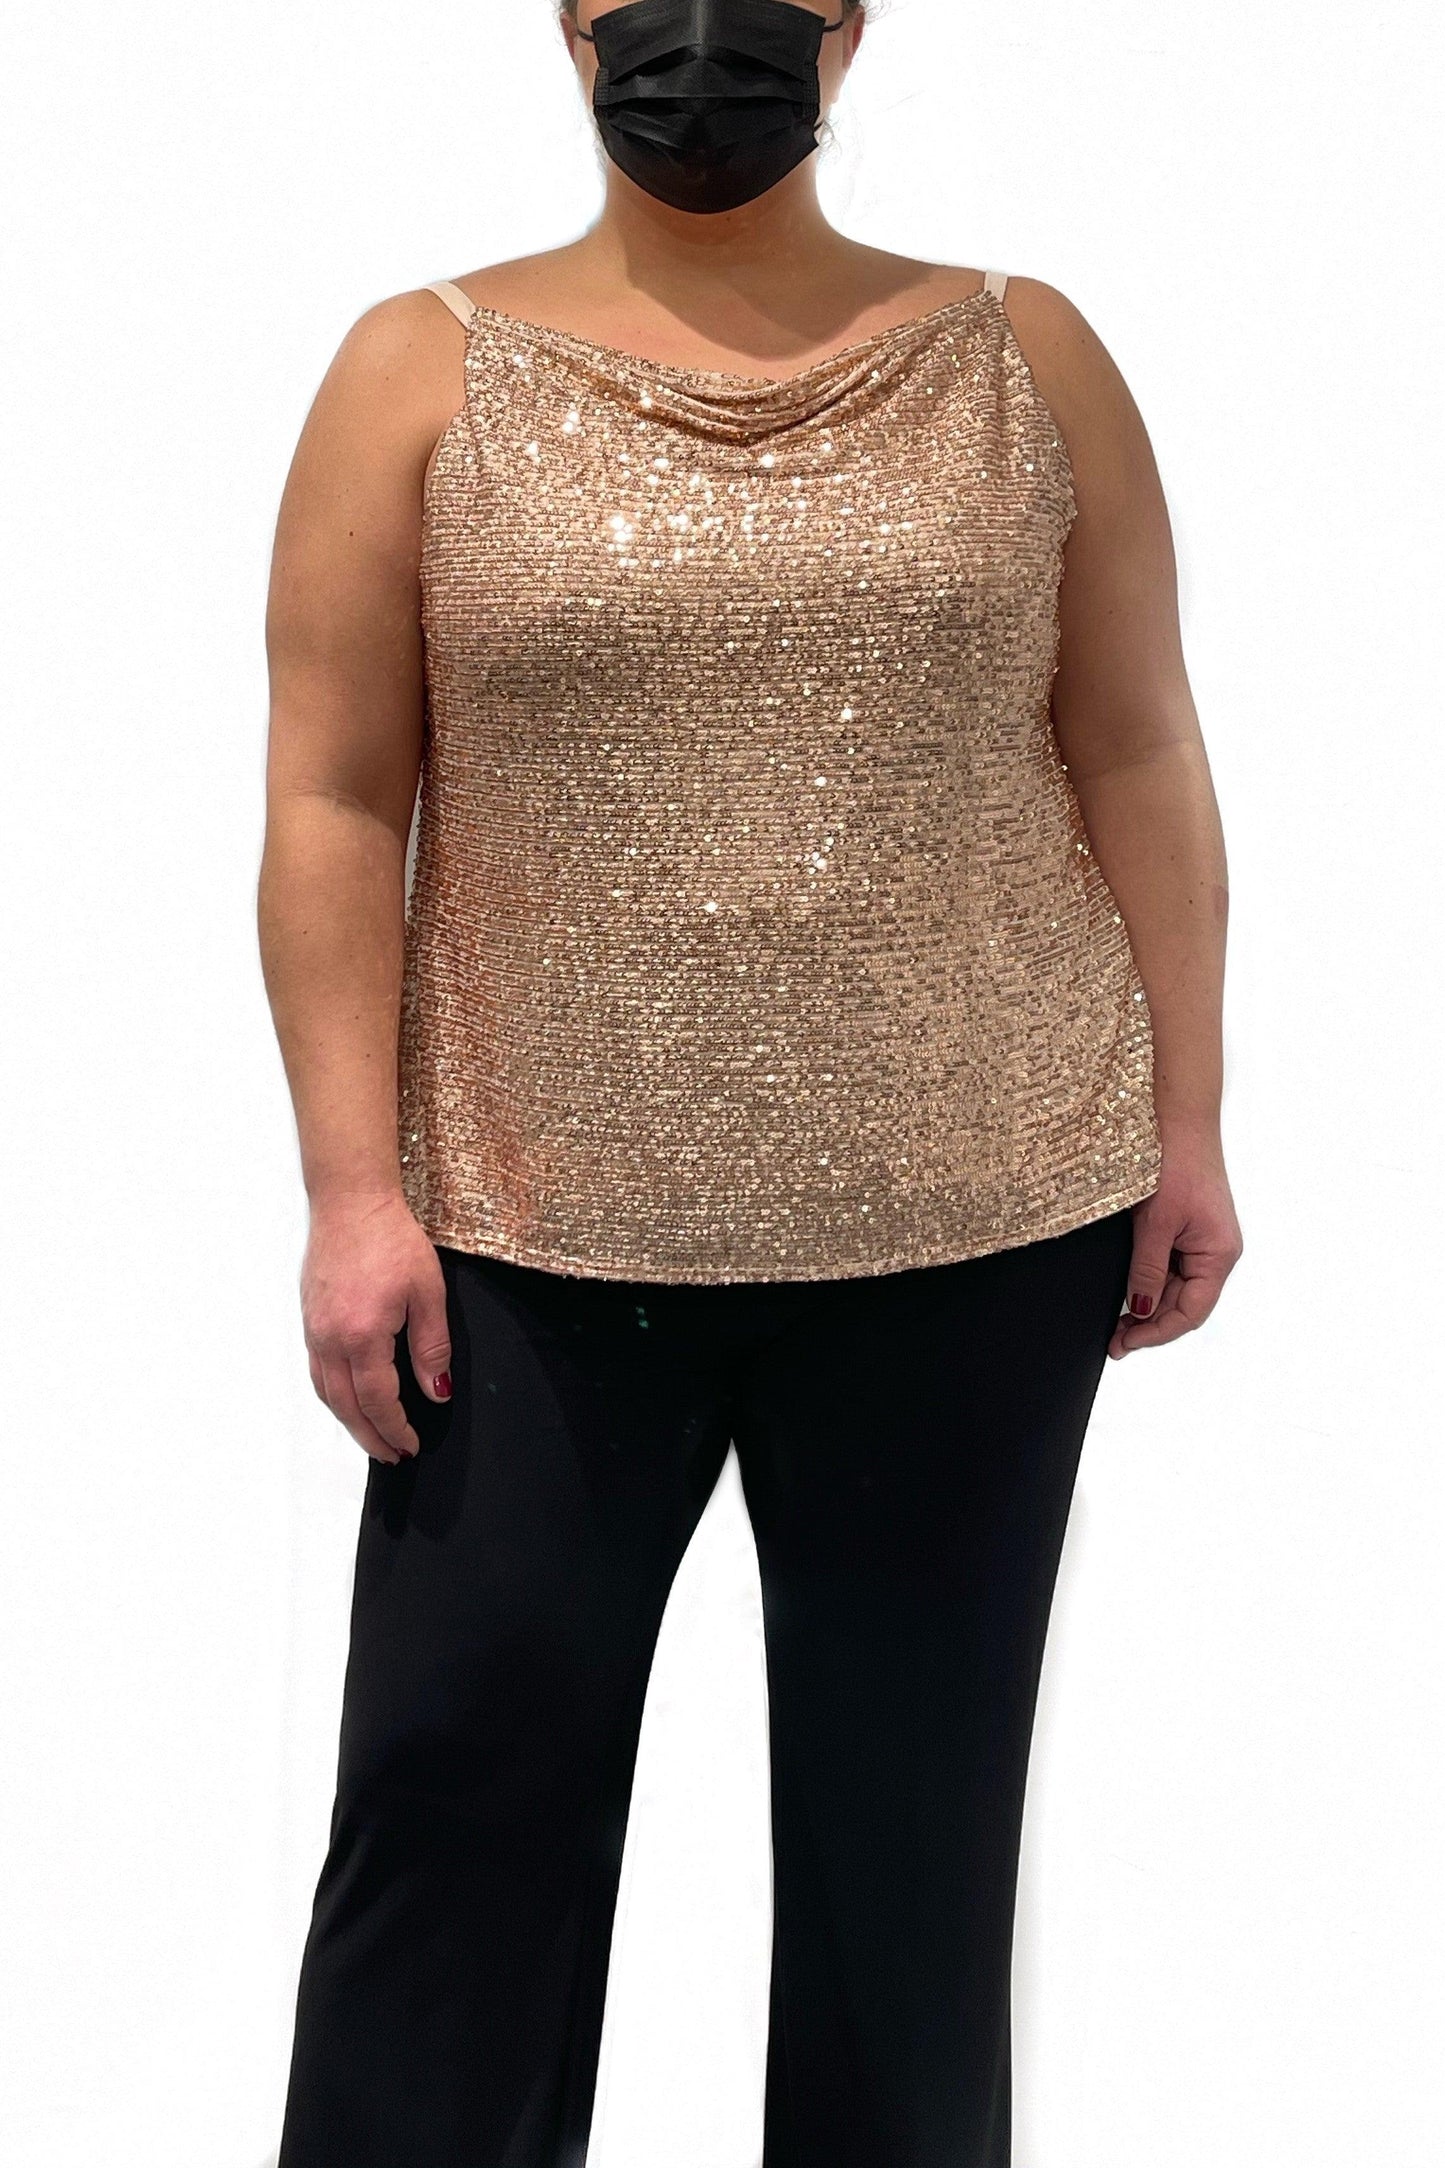 Nightway Formal Plus Size Sequined Top 22116W - The Dress Outlet